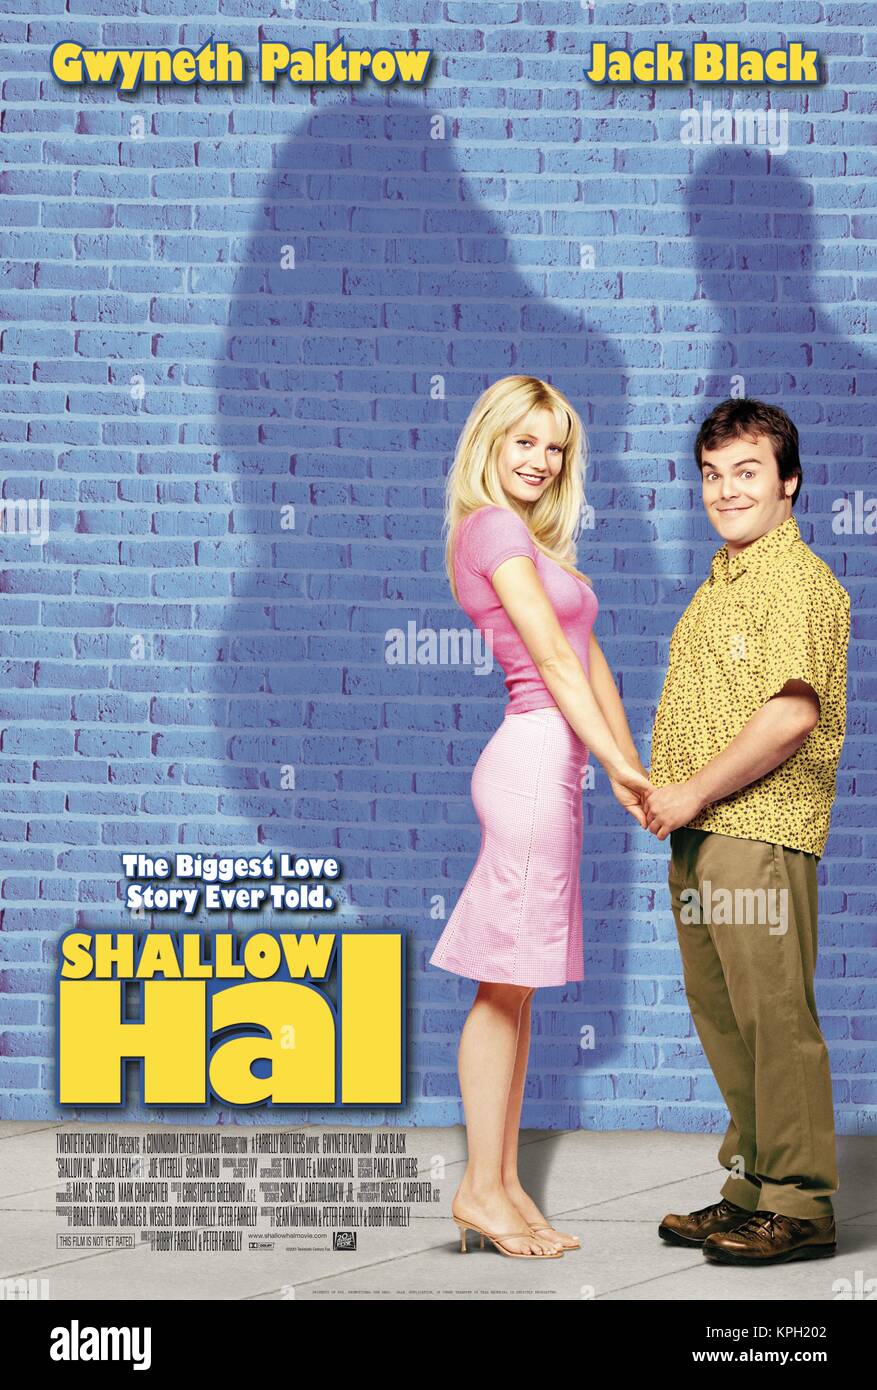 Shallow Hal Year : 2001 USA   Director : Bobby Farrelly Peter Farrell Gwyneth Paltrow, Jack Black American poster Stock Photo